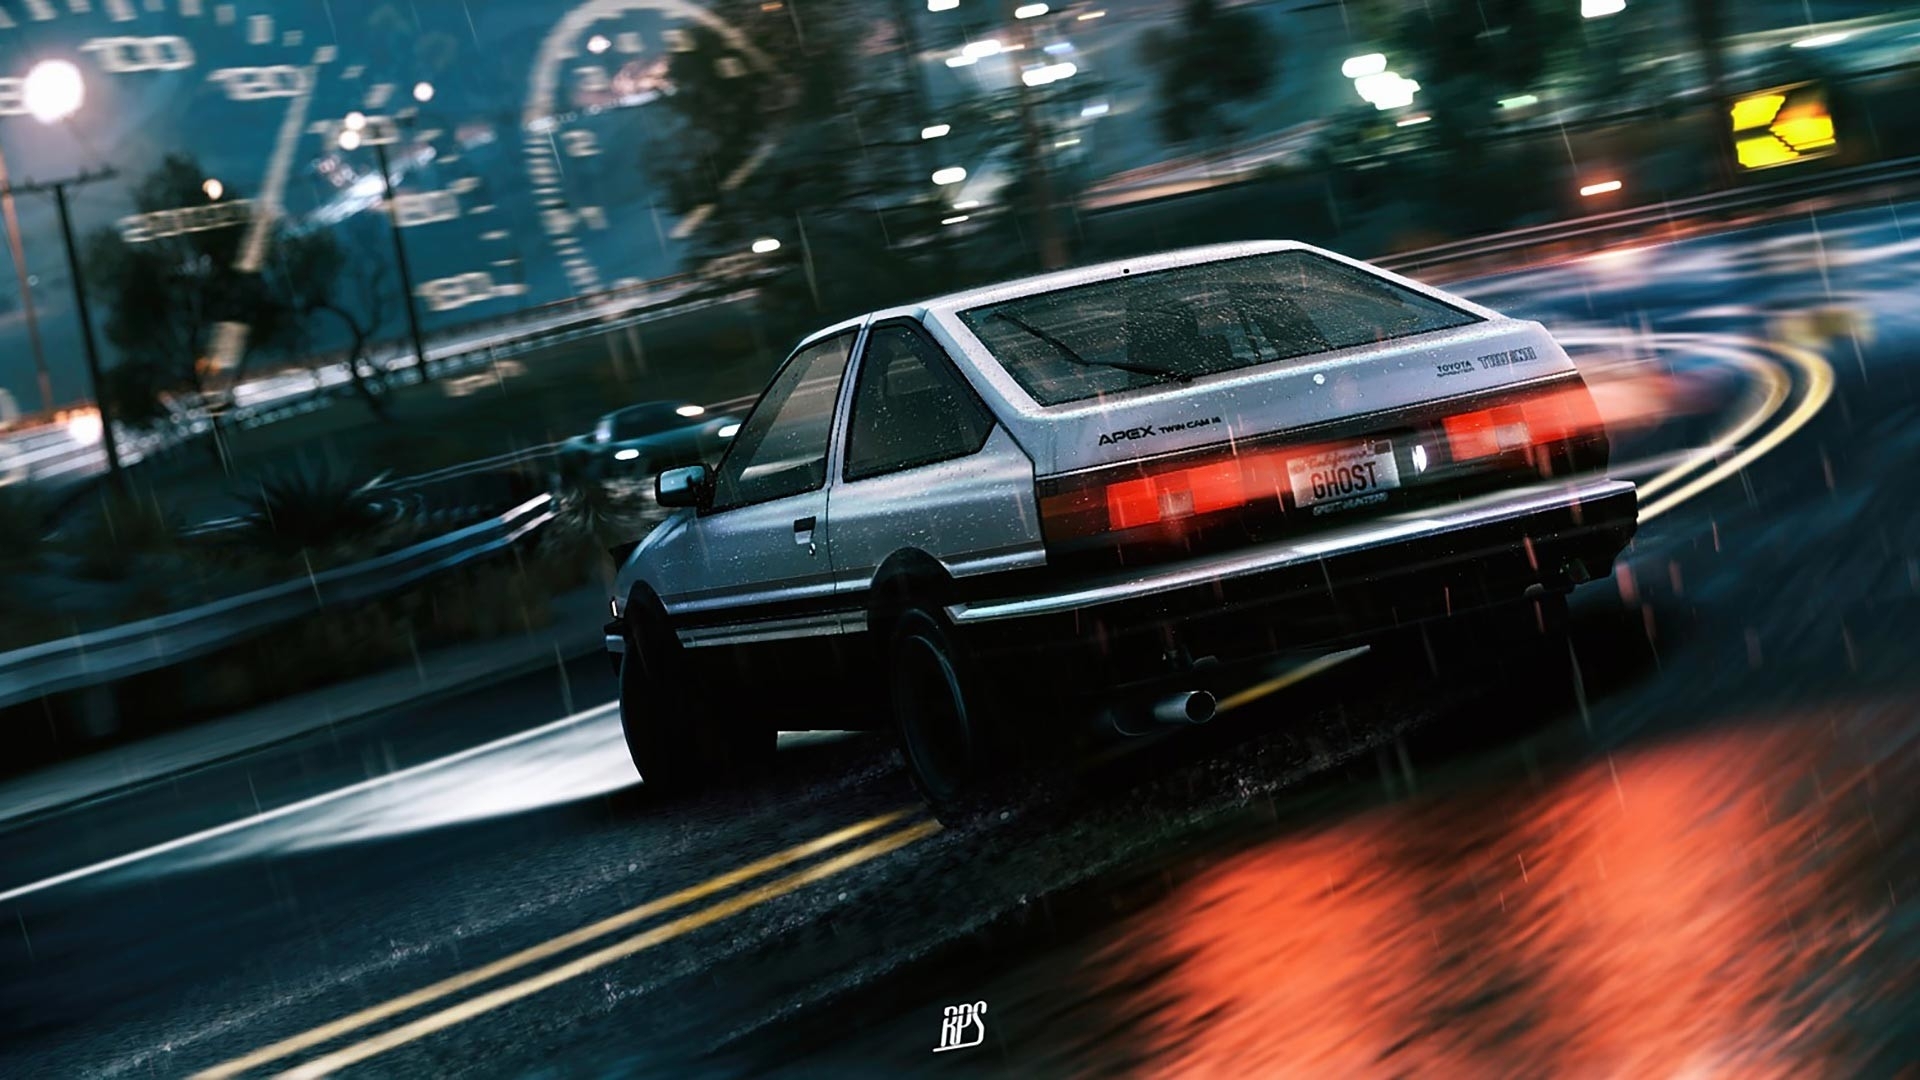 10 New Initial D Wallpaper 1920X1080 FULL HD 1080p For PC Background